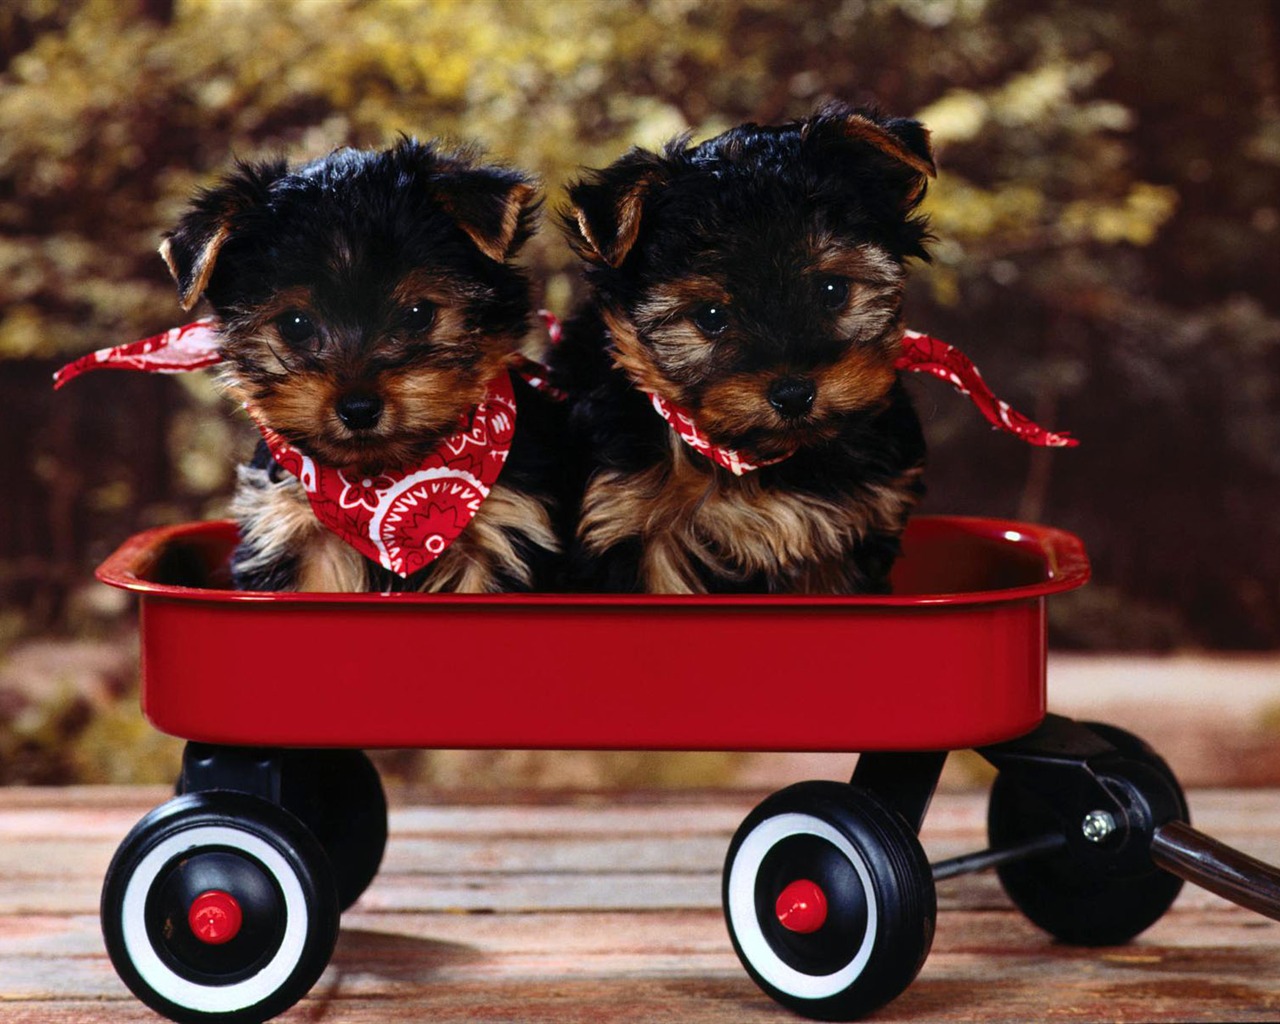 Puppy Photo HD wallpapers (2) #16 - 1280x1024